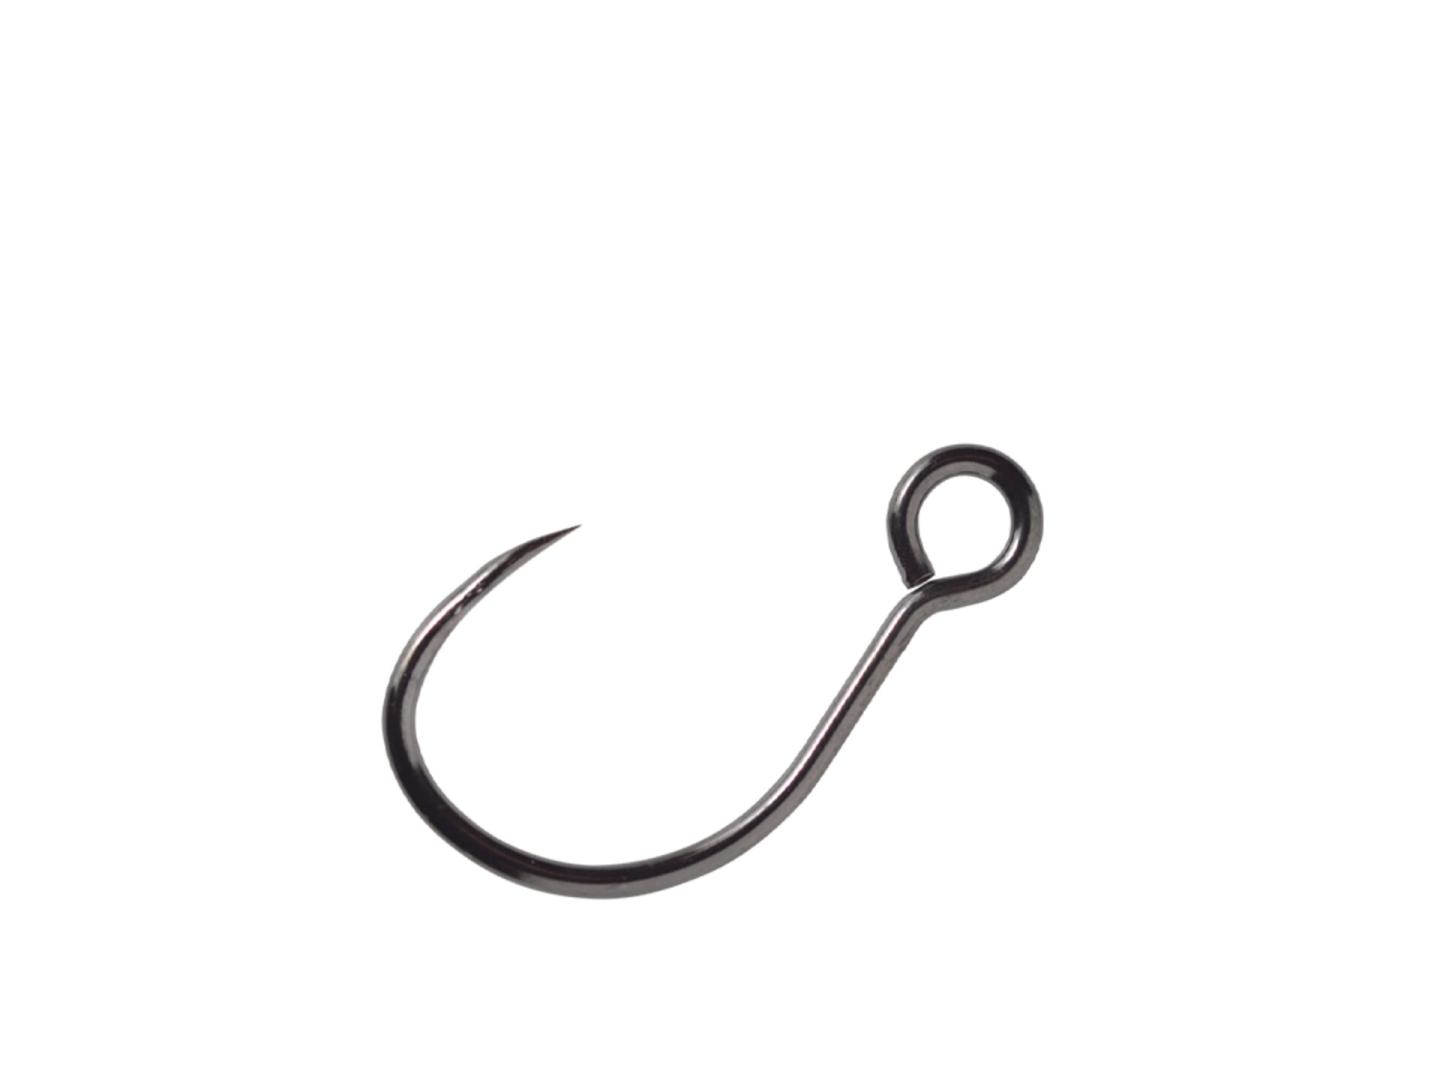 Vmc Hook 9291 Allround / Worm Hook at Rs 705.00, Fishing Hooks